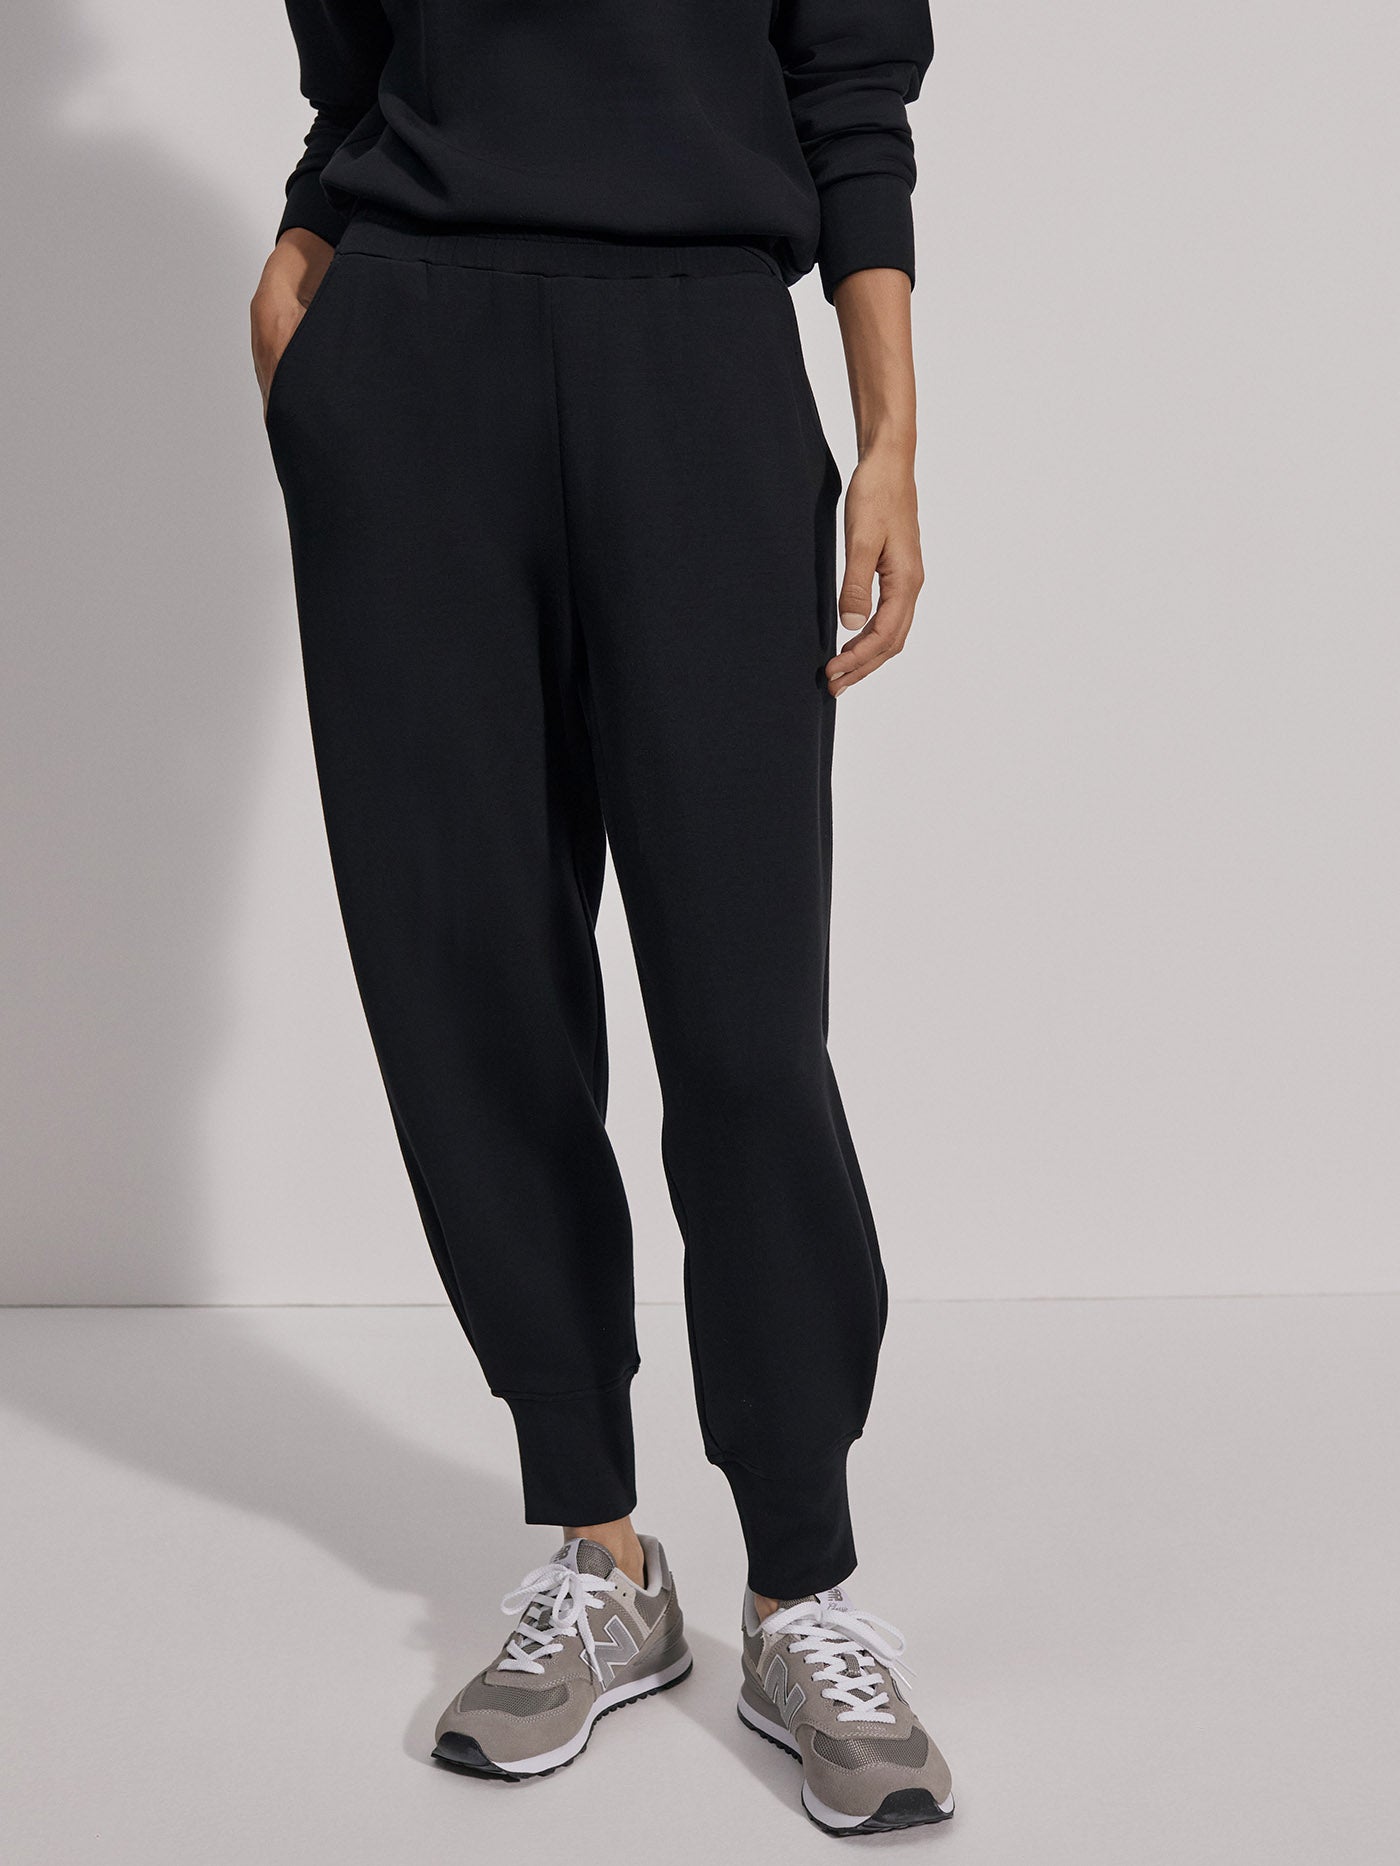 The Relaxed Pant 25 | Varley UK